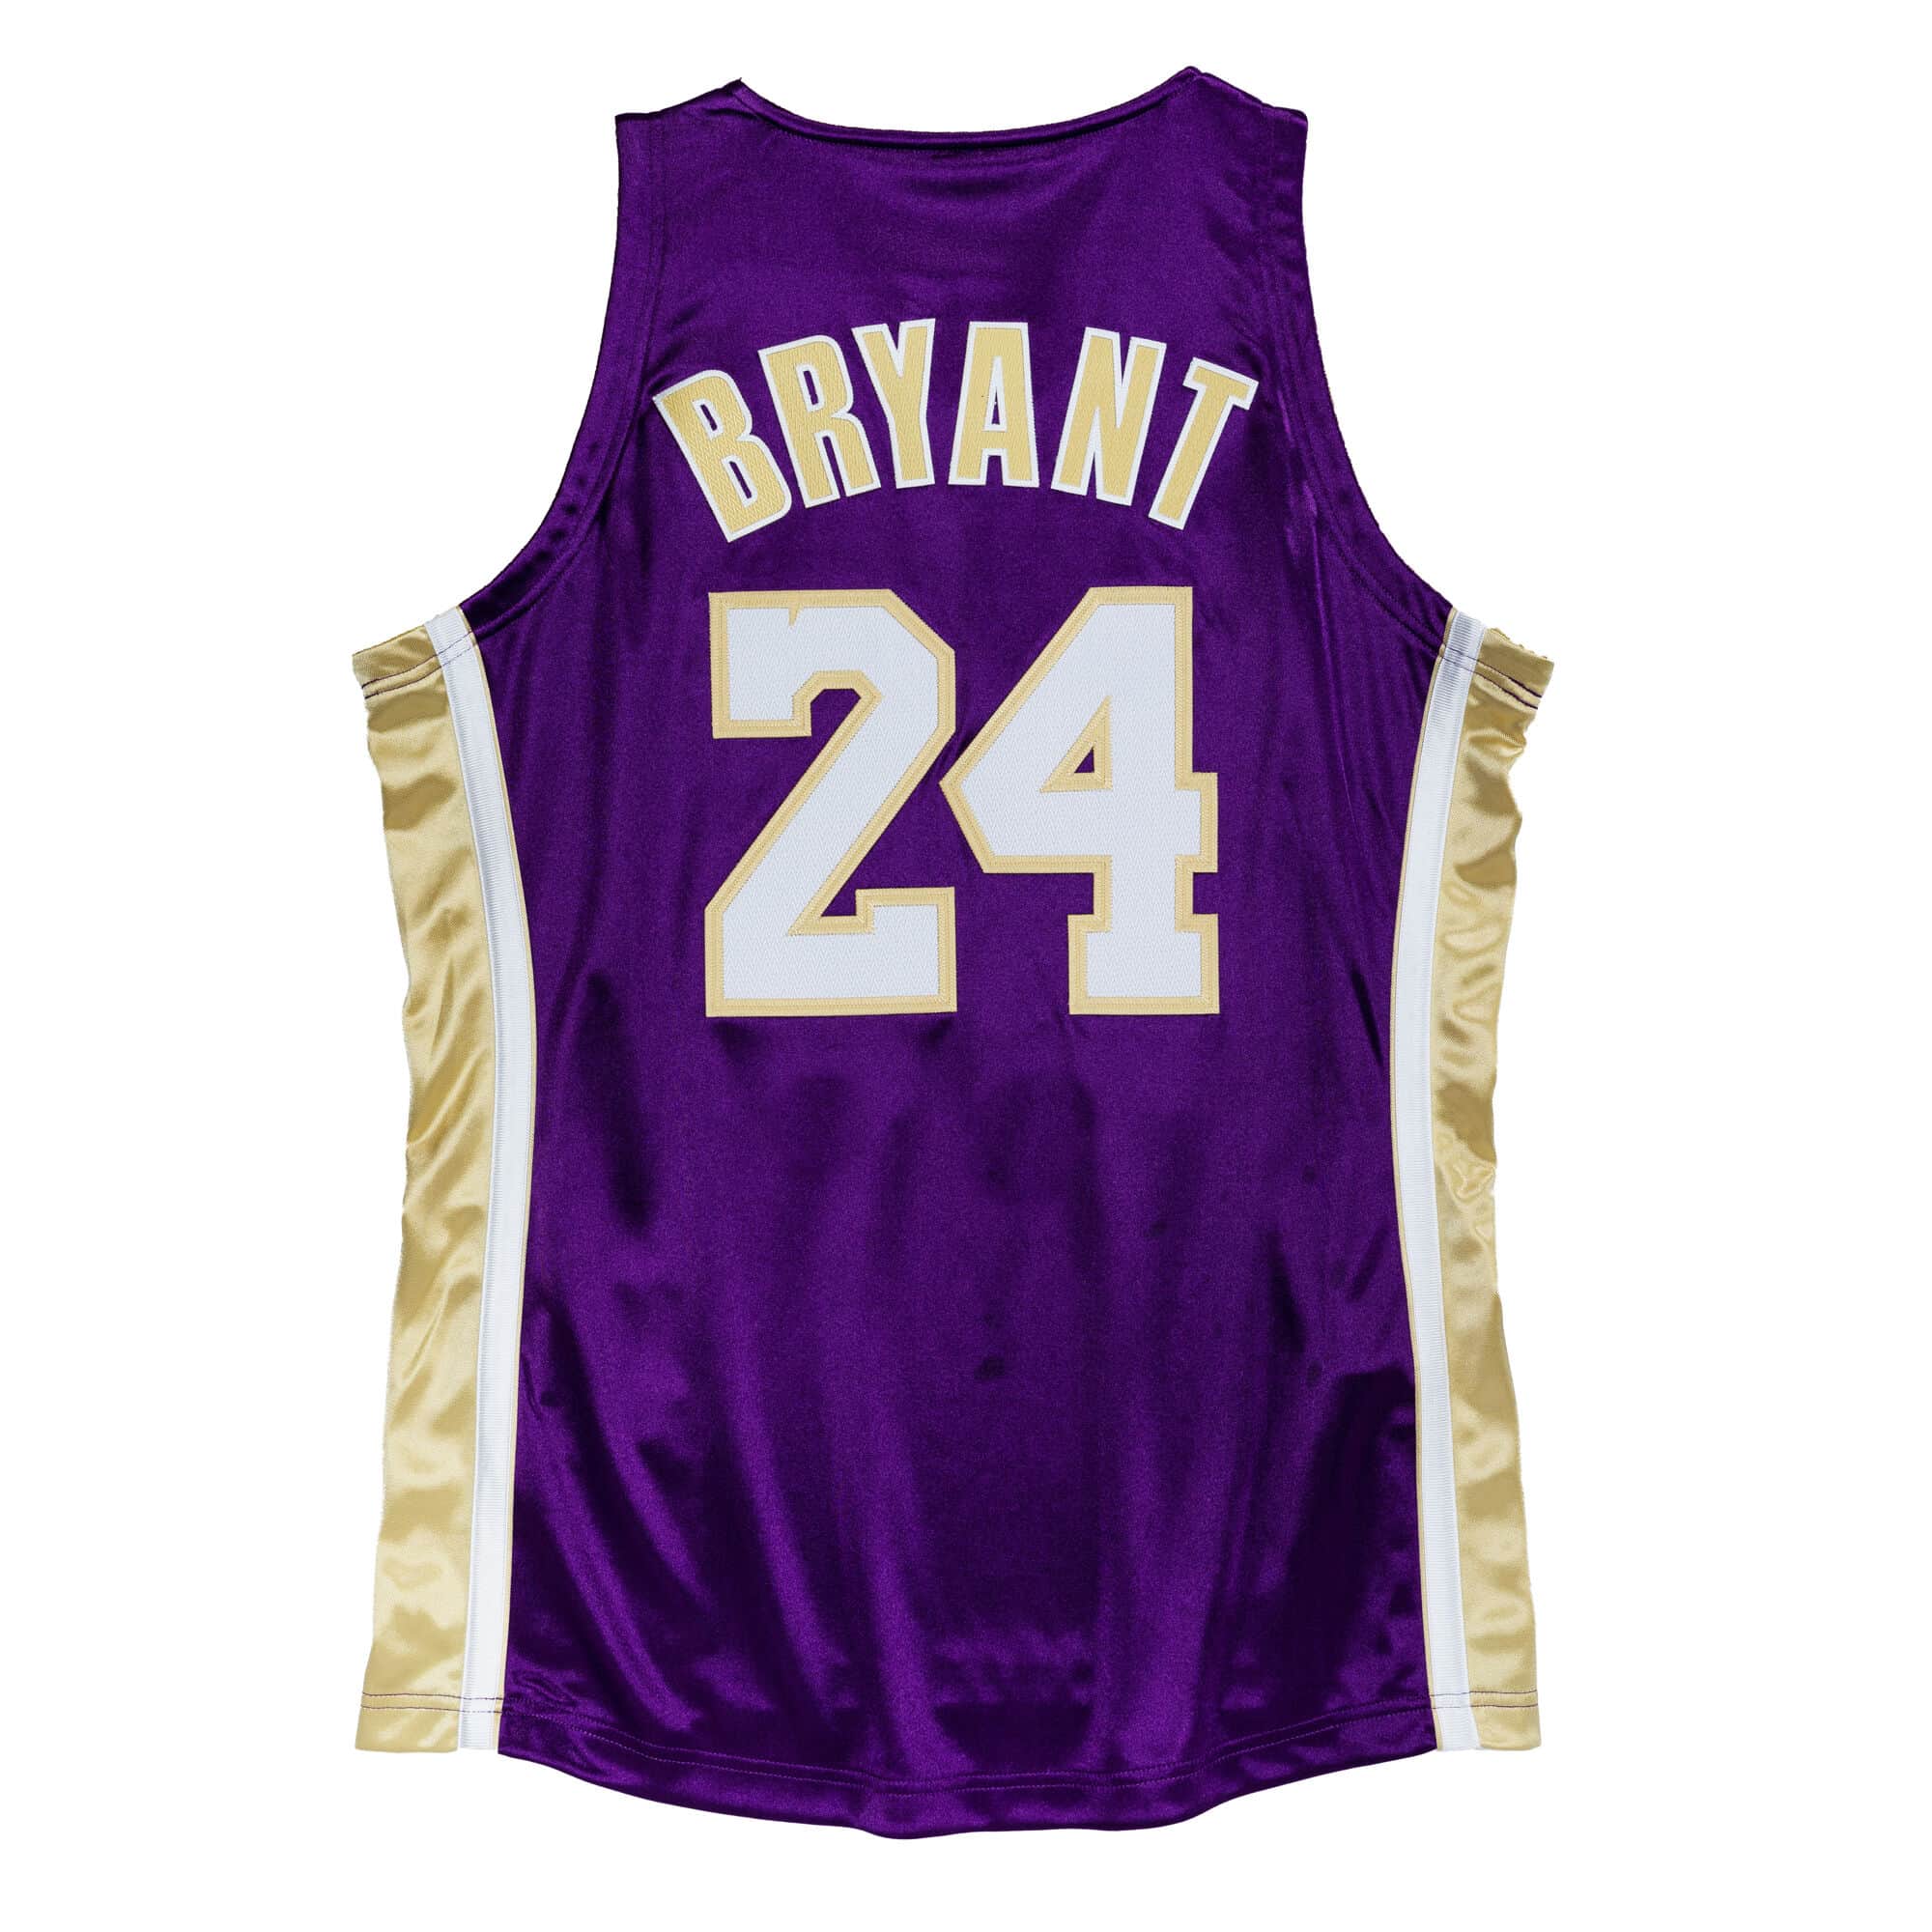 Los Angeles Lakers Authentic All-Star 98 Kobe Bryant Jersey S